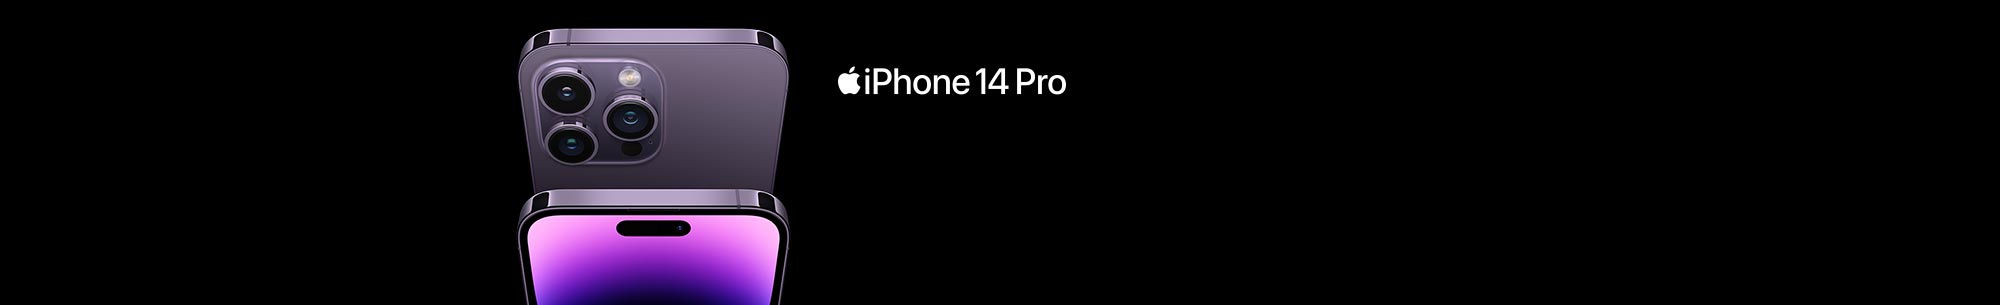 Cell phone, iPhone 14 Pro